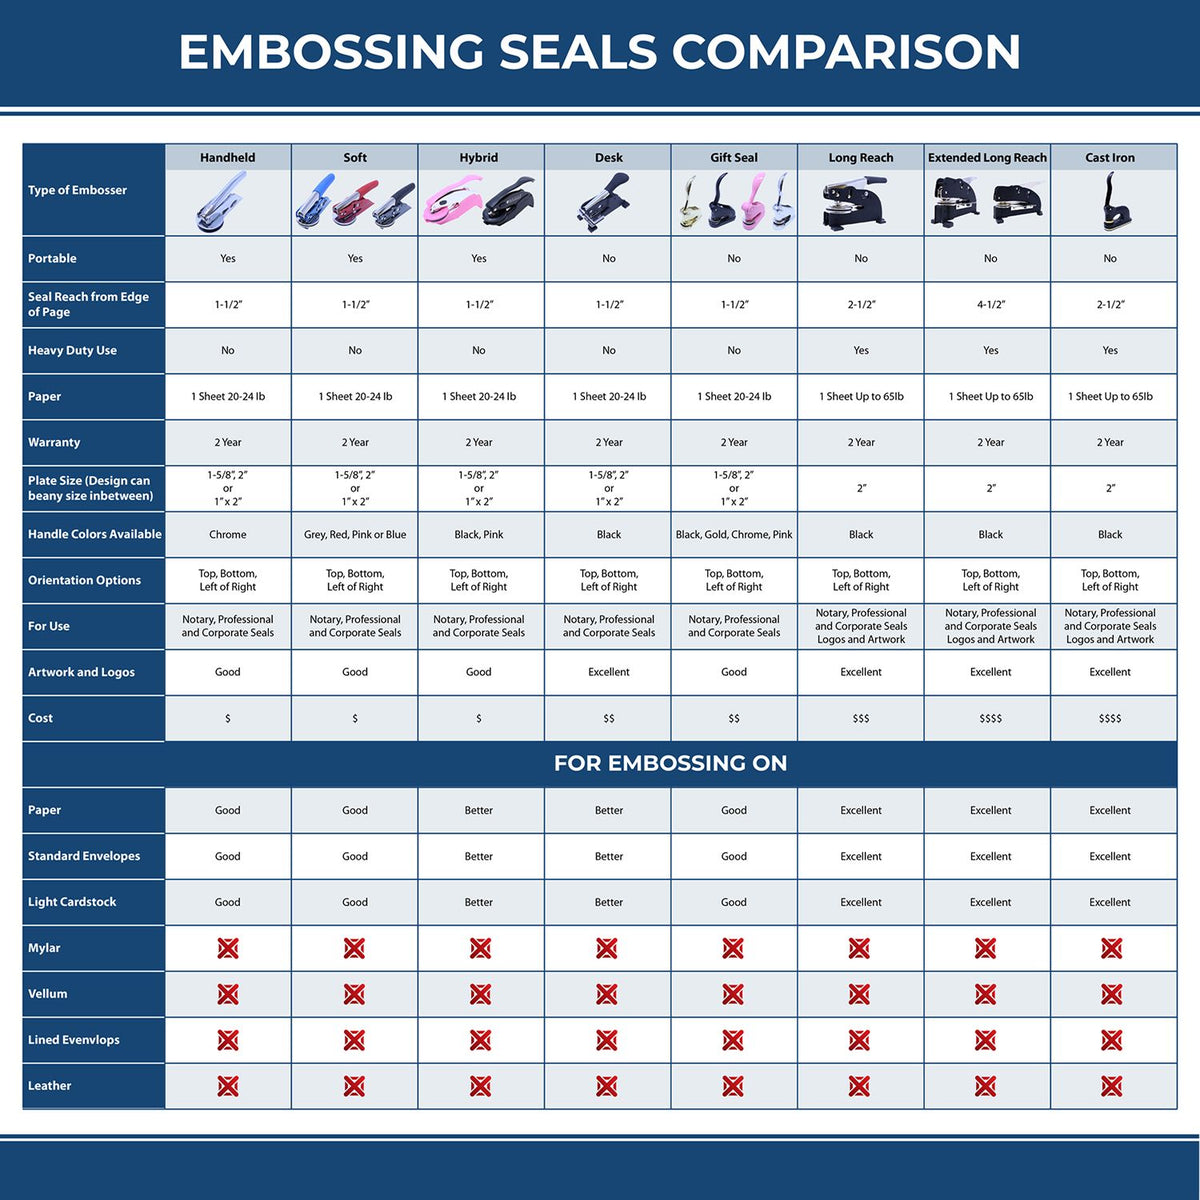 A comparison chart for the different types of mount models available for the Heavy Duty Cast Iron Vermont Architect Embosser.